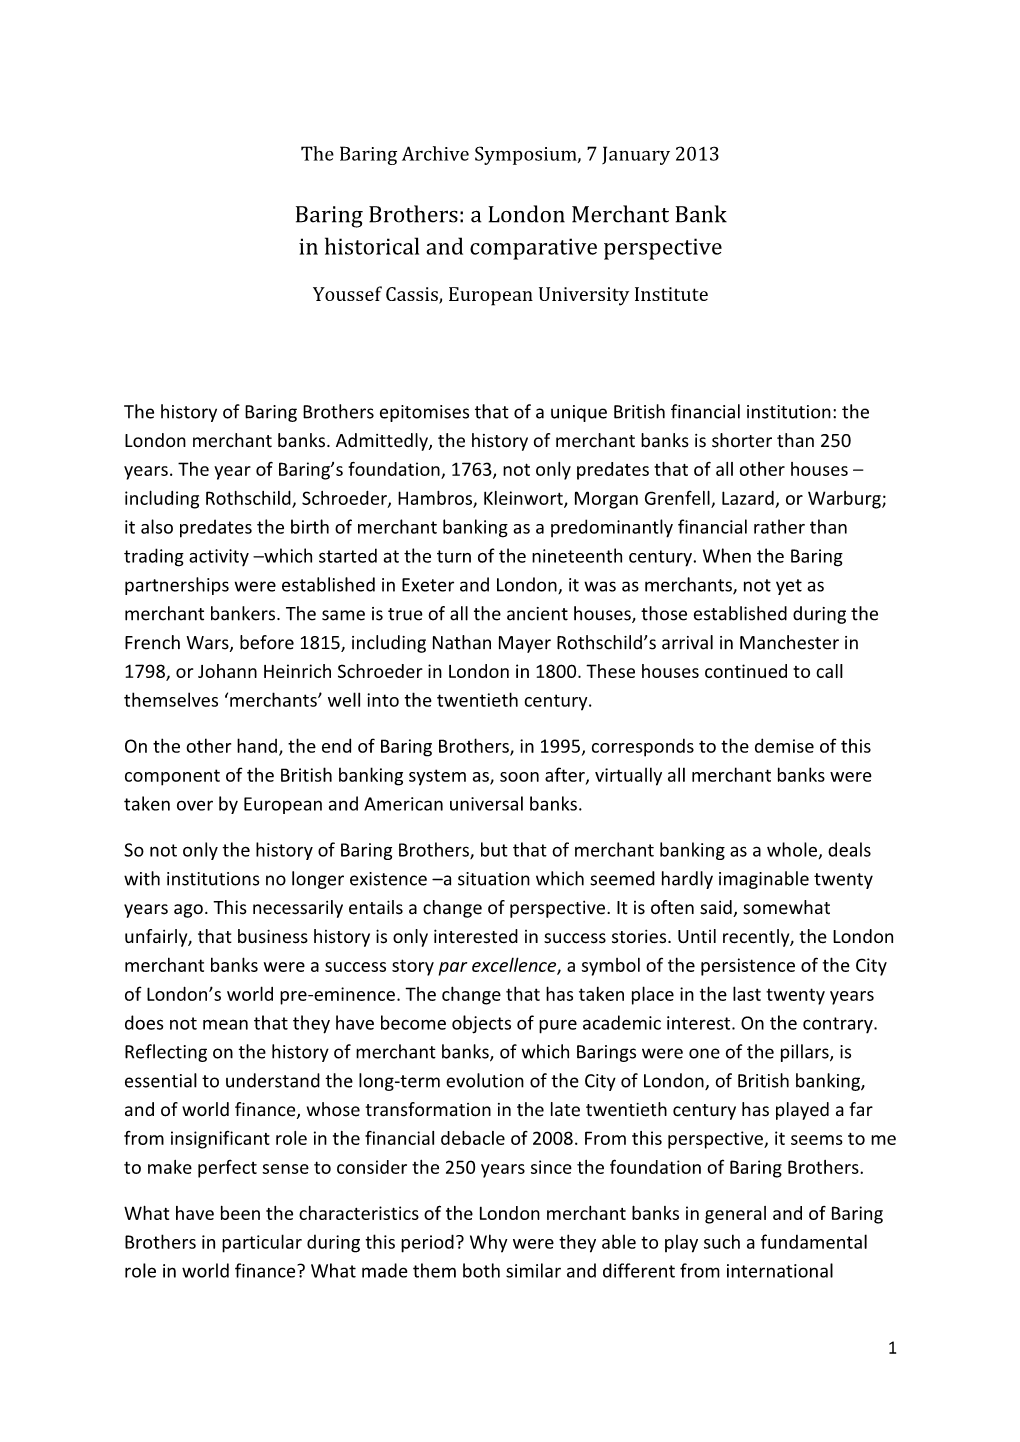 Baring Brothers: a London Merchant Bank in Historical and Comparative Perspective